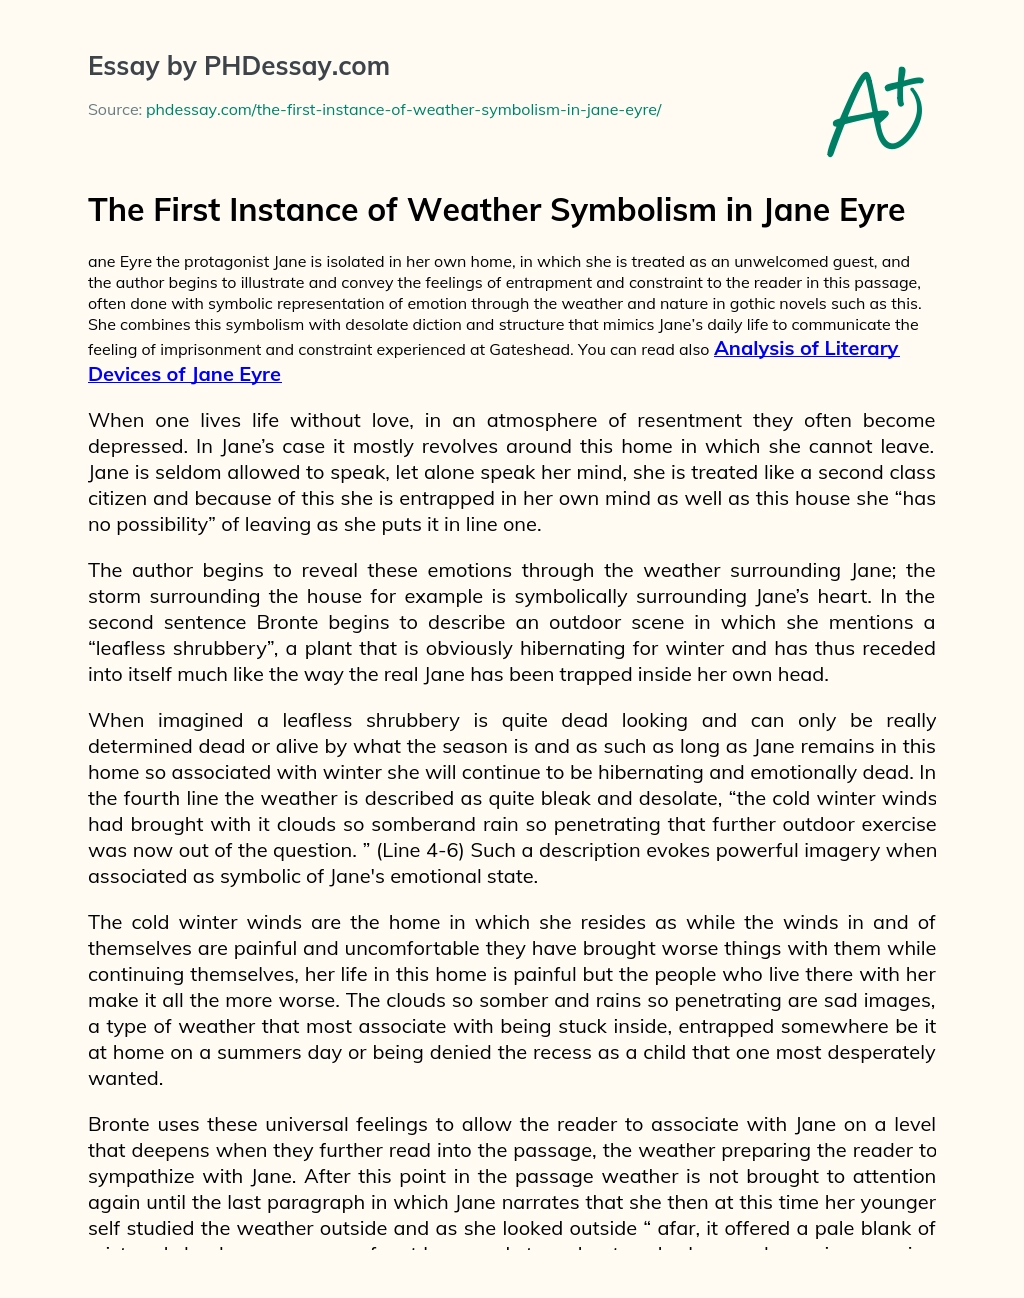 The First Instance of Weather Symbolism in Jane Eyre essay